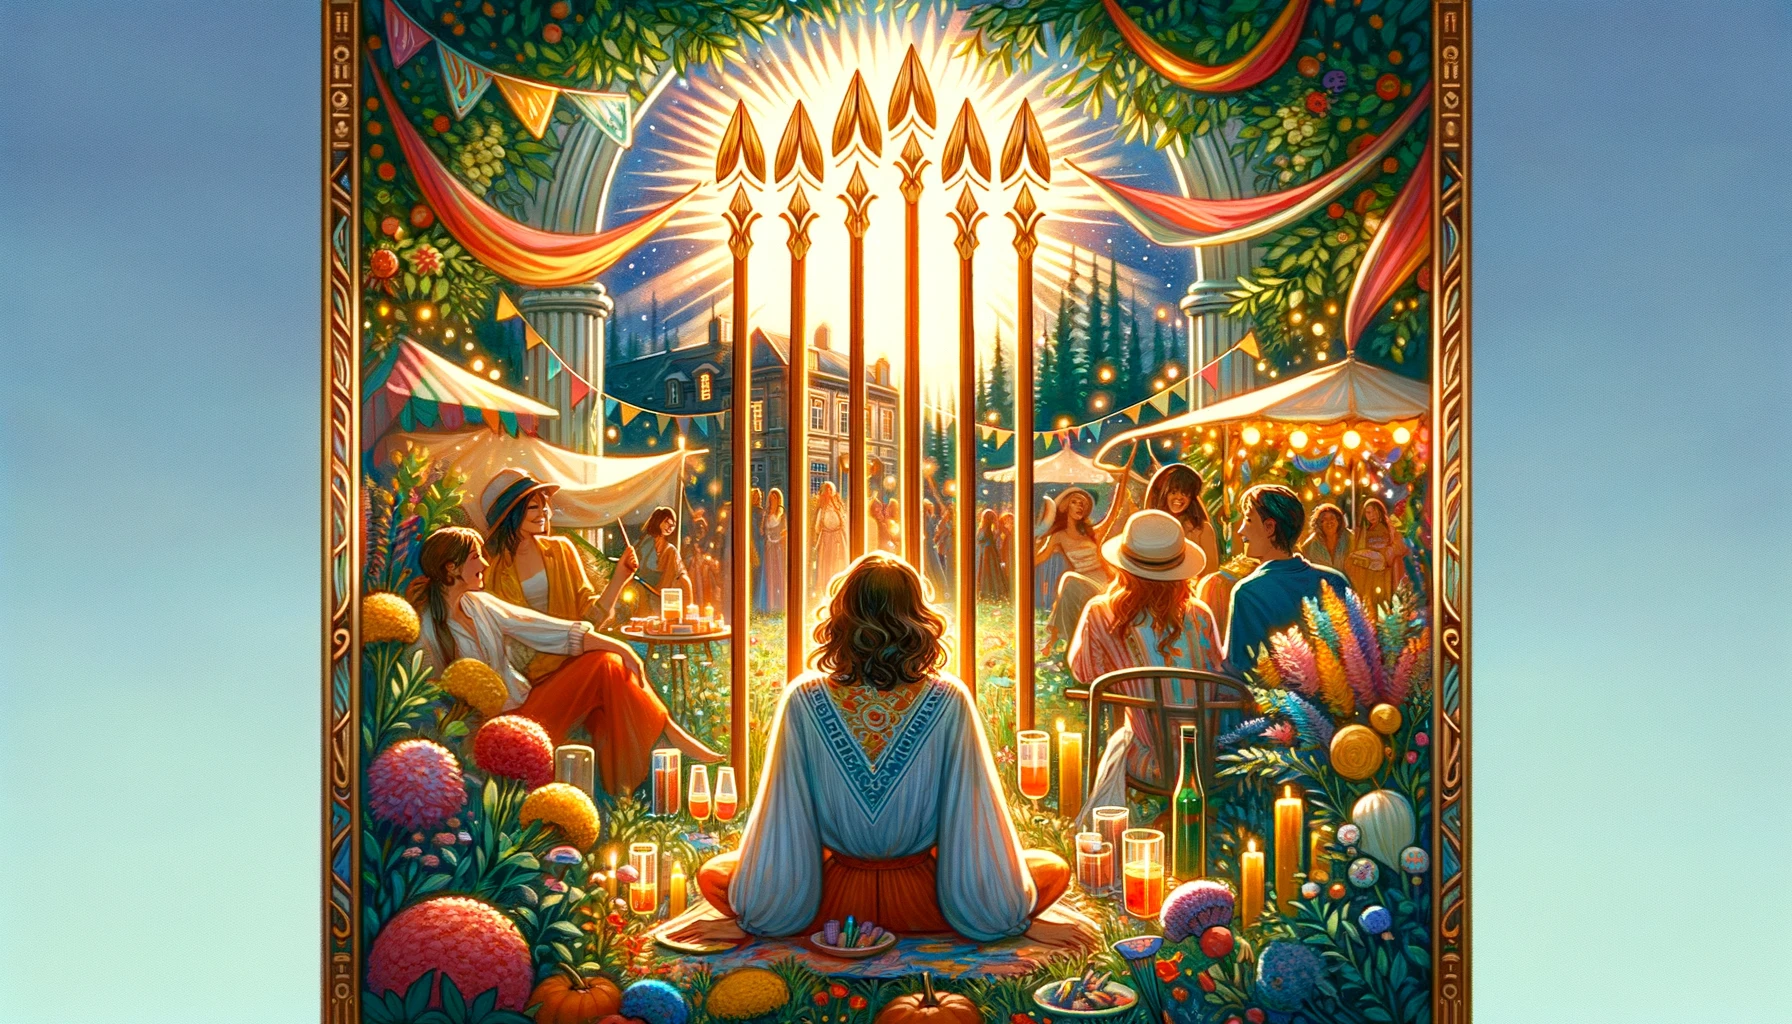 A person reaching out to join a joyful gathering, symbolizing the desire for celebration, community, and stability. The vibrant scene depicts harmonious relationships, meaningful connections, and a life filled with joy and celebration, against a backdrop representing unity, prosperity, and the realization of dreams.